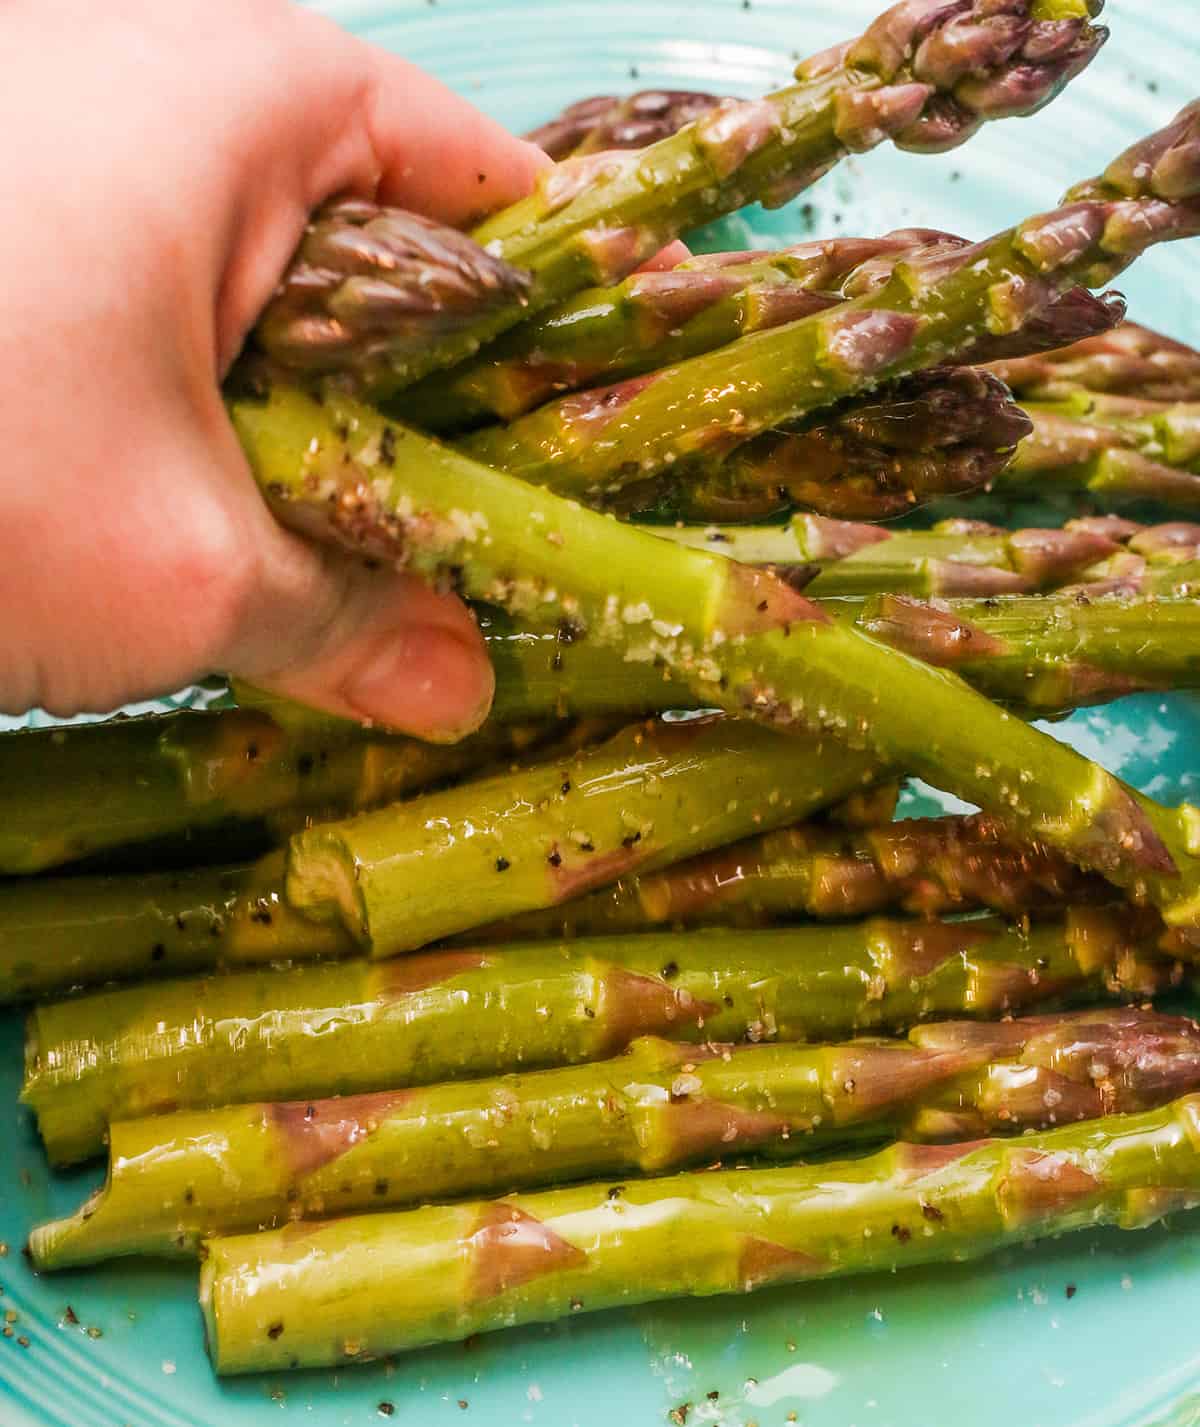 A hand tossing asparagus in oil and salt and pepper.